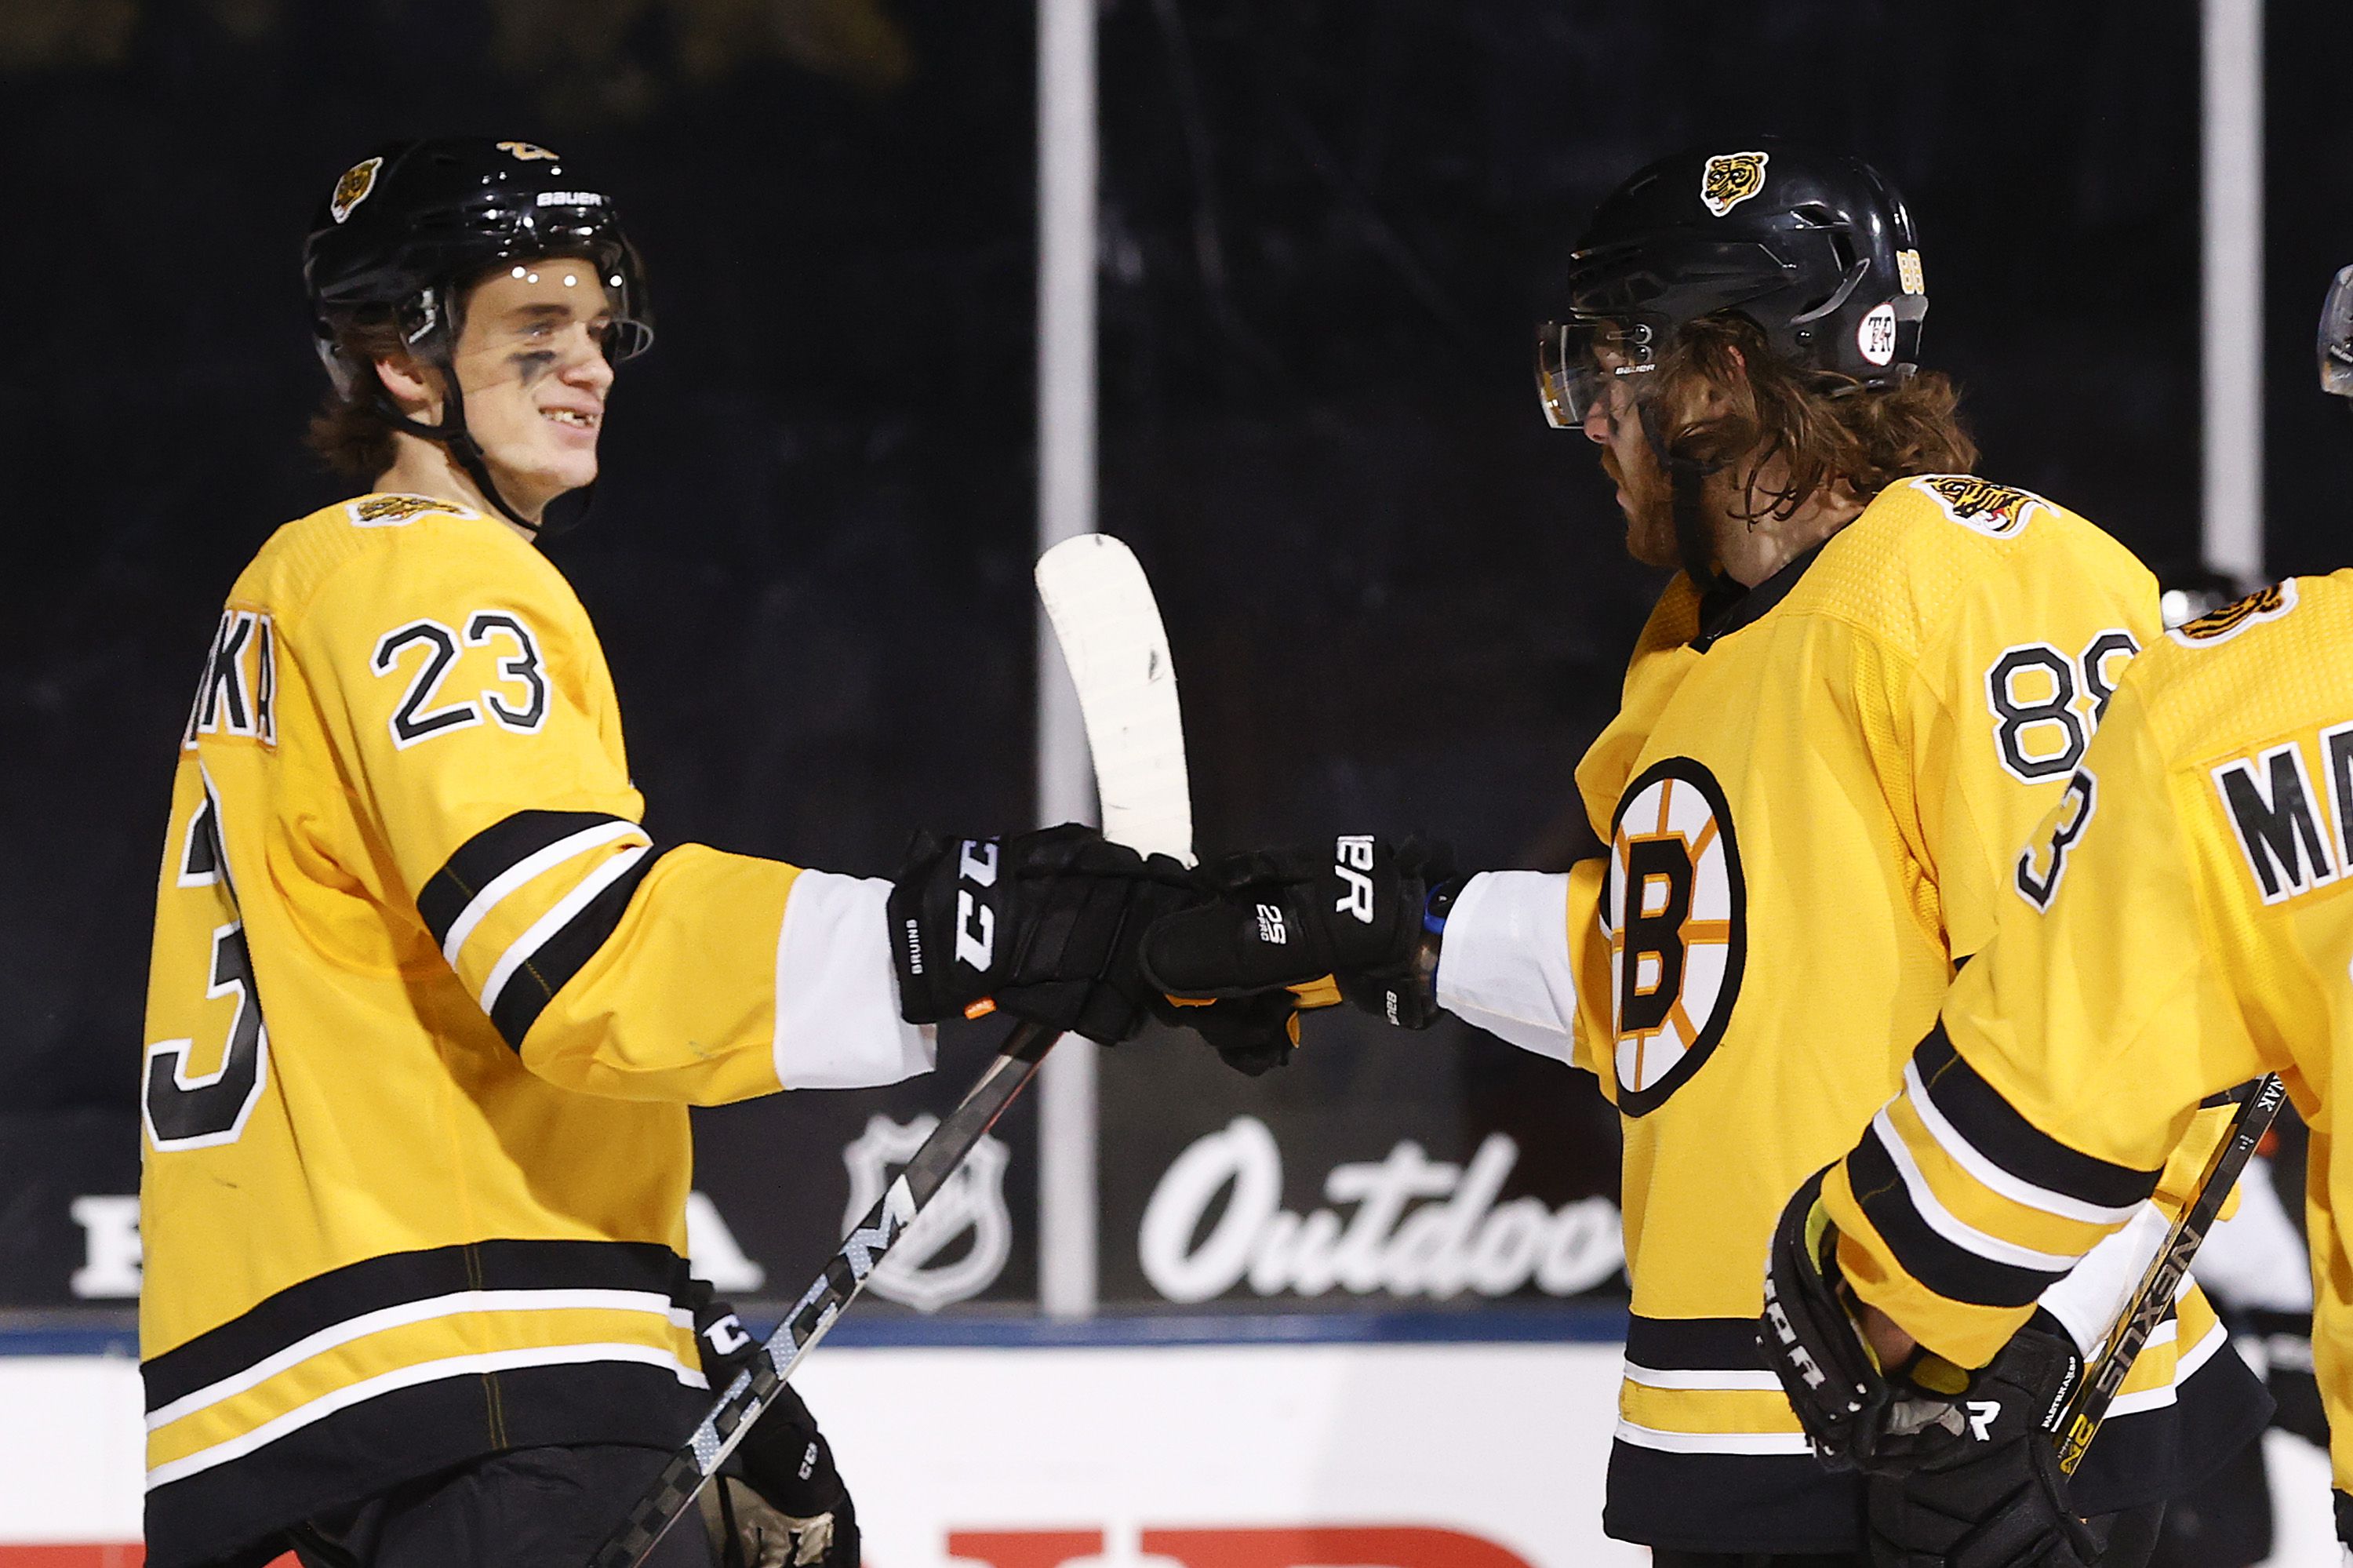 NHL - Winter Classic offers glimpse of Boston Bruins' David Pastrnak, an  'all-world' personality - 2019 - ESPN